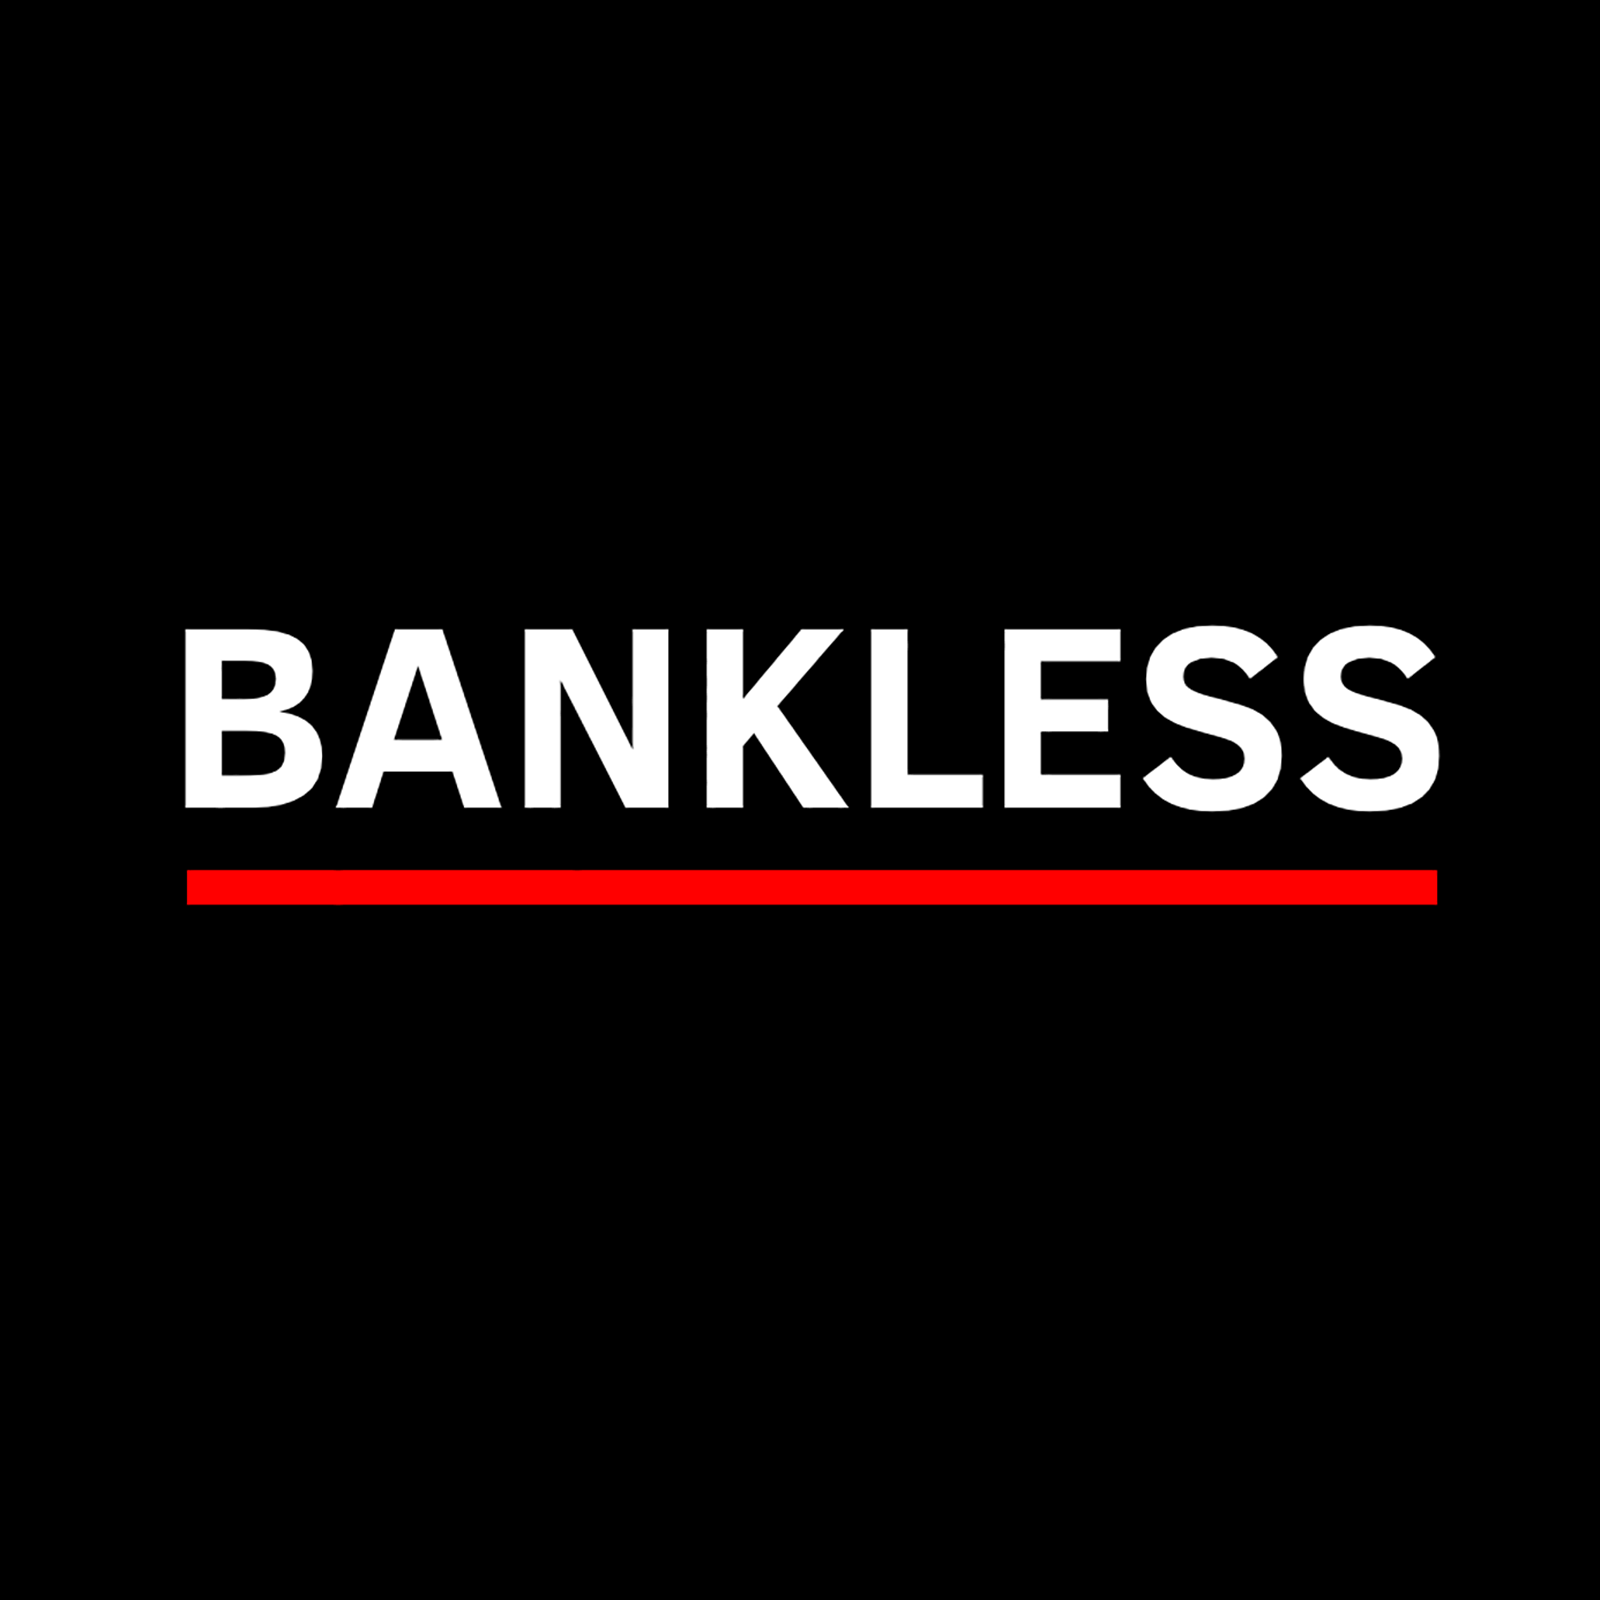 Fresh update on "jay powell" discussed on Bankless